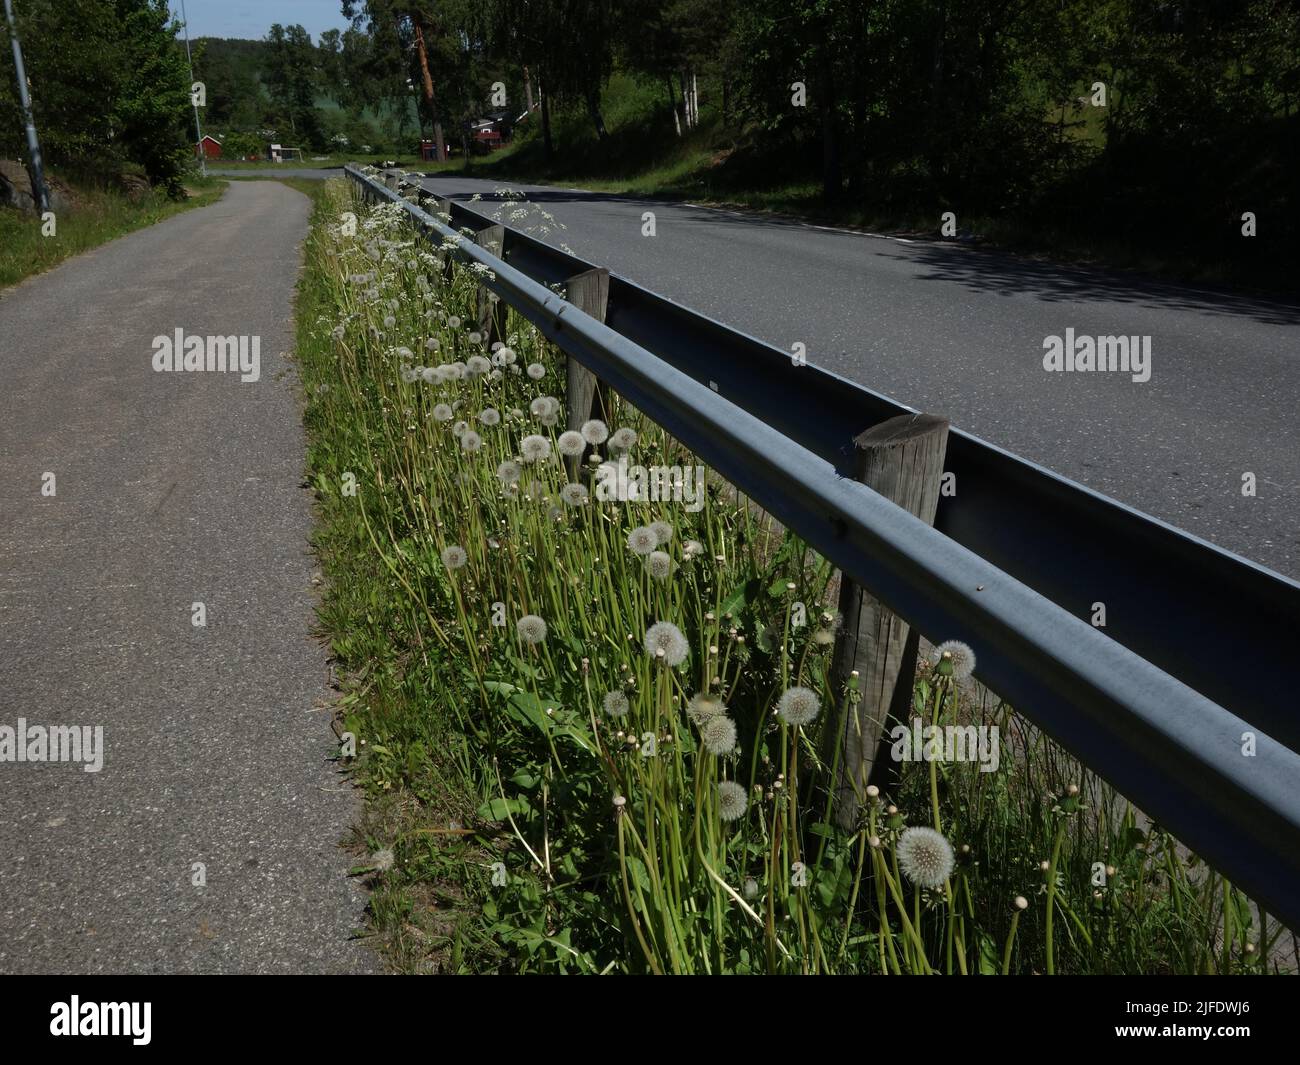 Kurefjordveien by Møvik, where the guardrail separates roads and sidewalks, decorates the Dandelion with its long stems and mature Blowball heads. Stock Photo